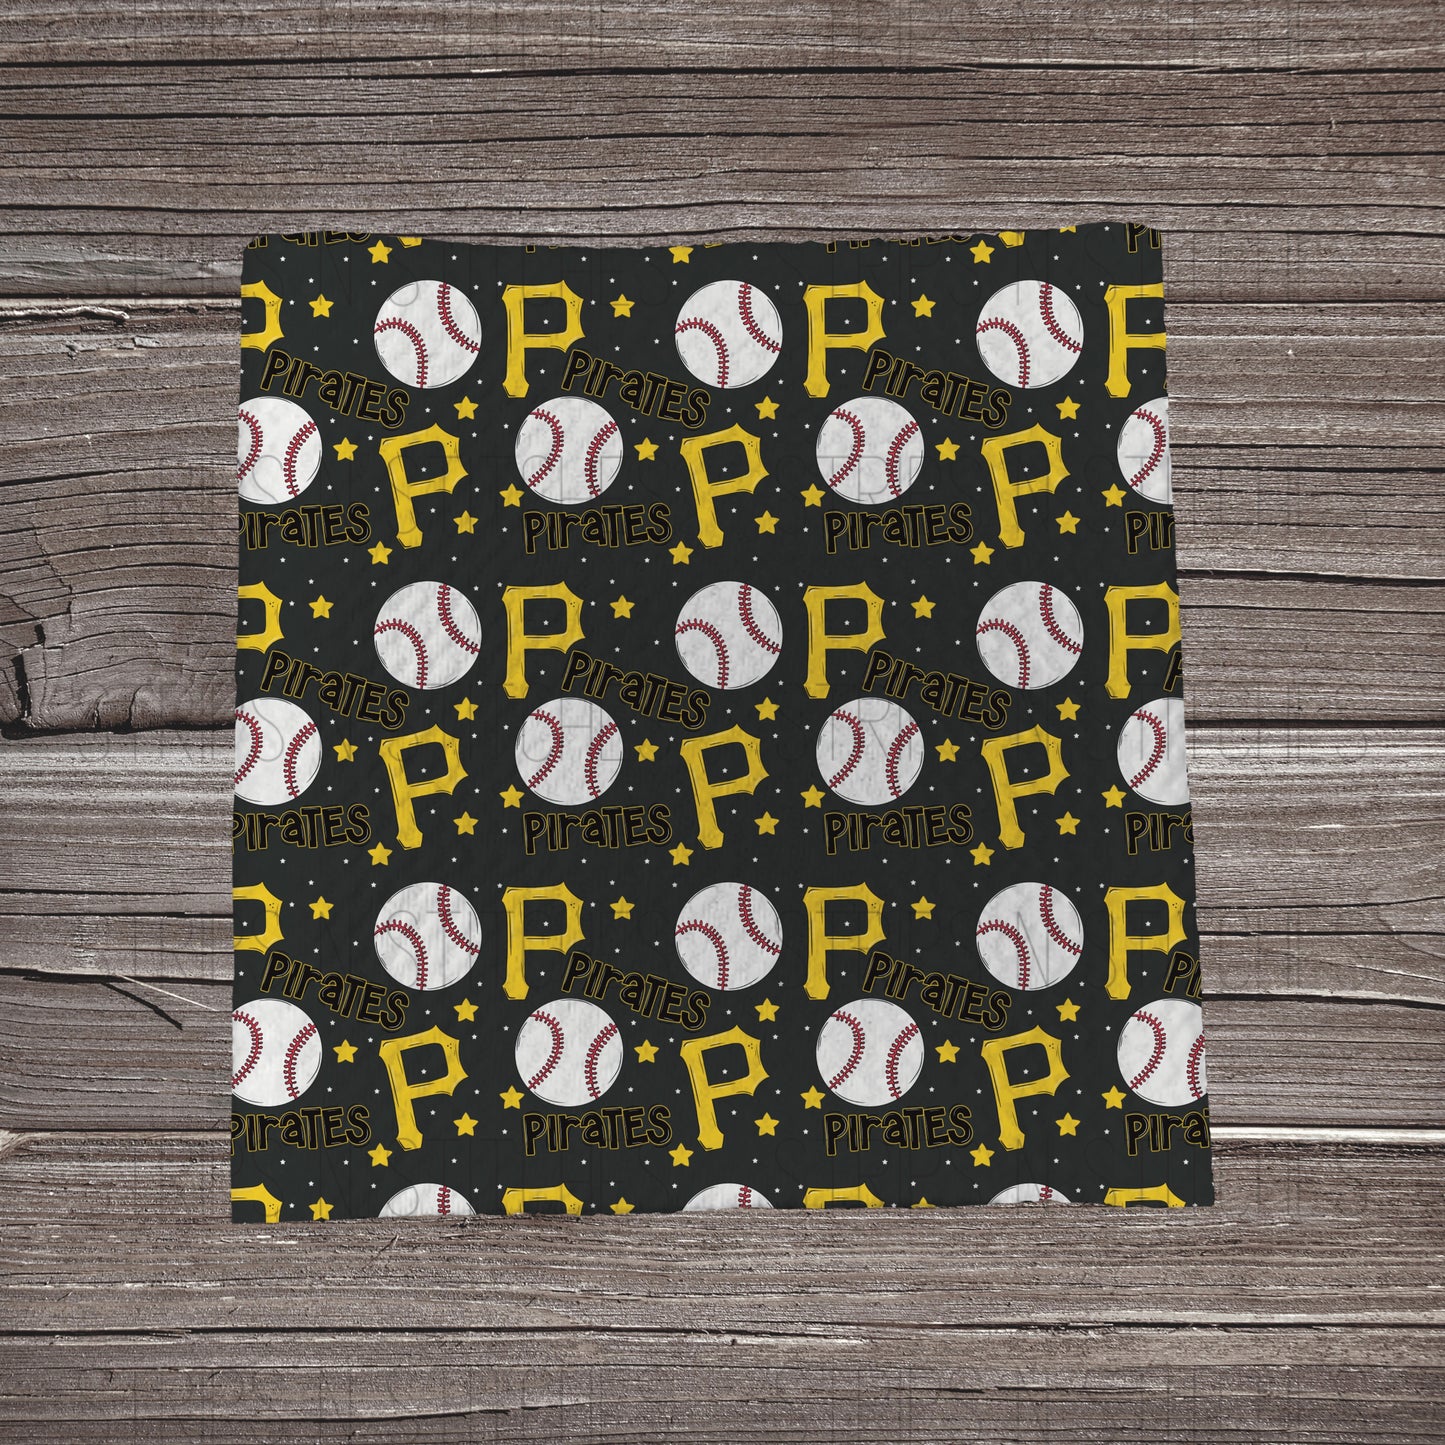 MLB STARS| All 30 Teams Available | Fabric Strip- Bow Making- Headwrap- Scrunchies